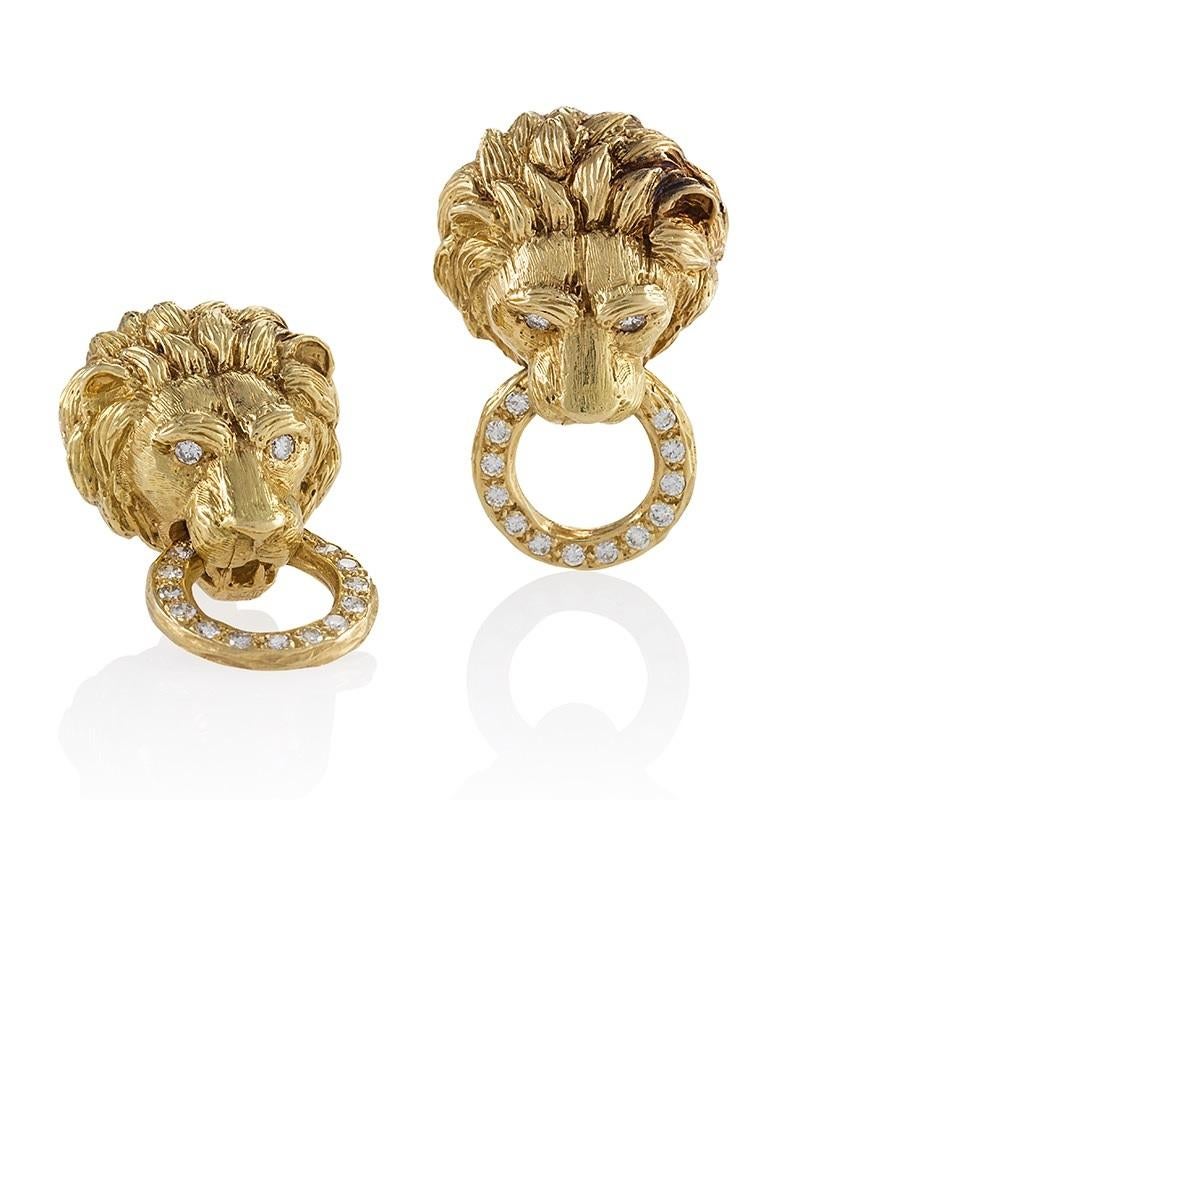 A pair of Mid-20th Century 18 karat gold lion head earrings with diamonds by Van Cleef & Arpels. The earrings have 30 round diamonds with an approximate total weight of 1.50 carats. The earrings are designed as a lion mask supporting a diamond set